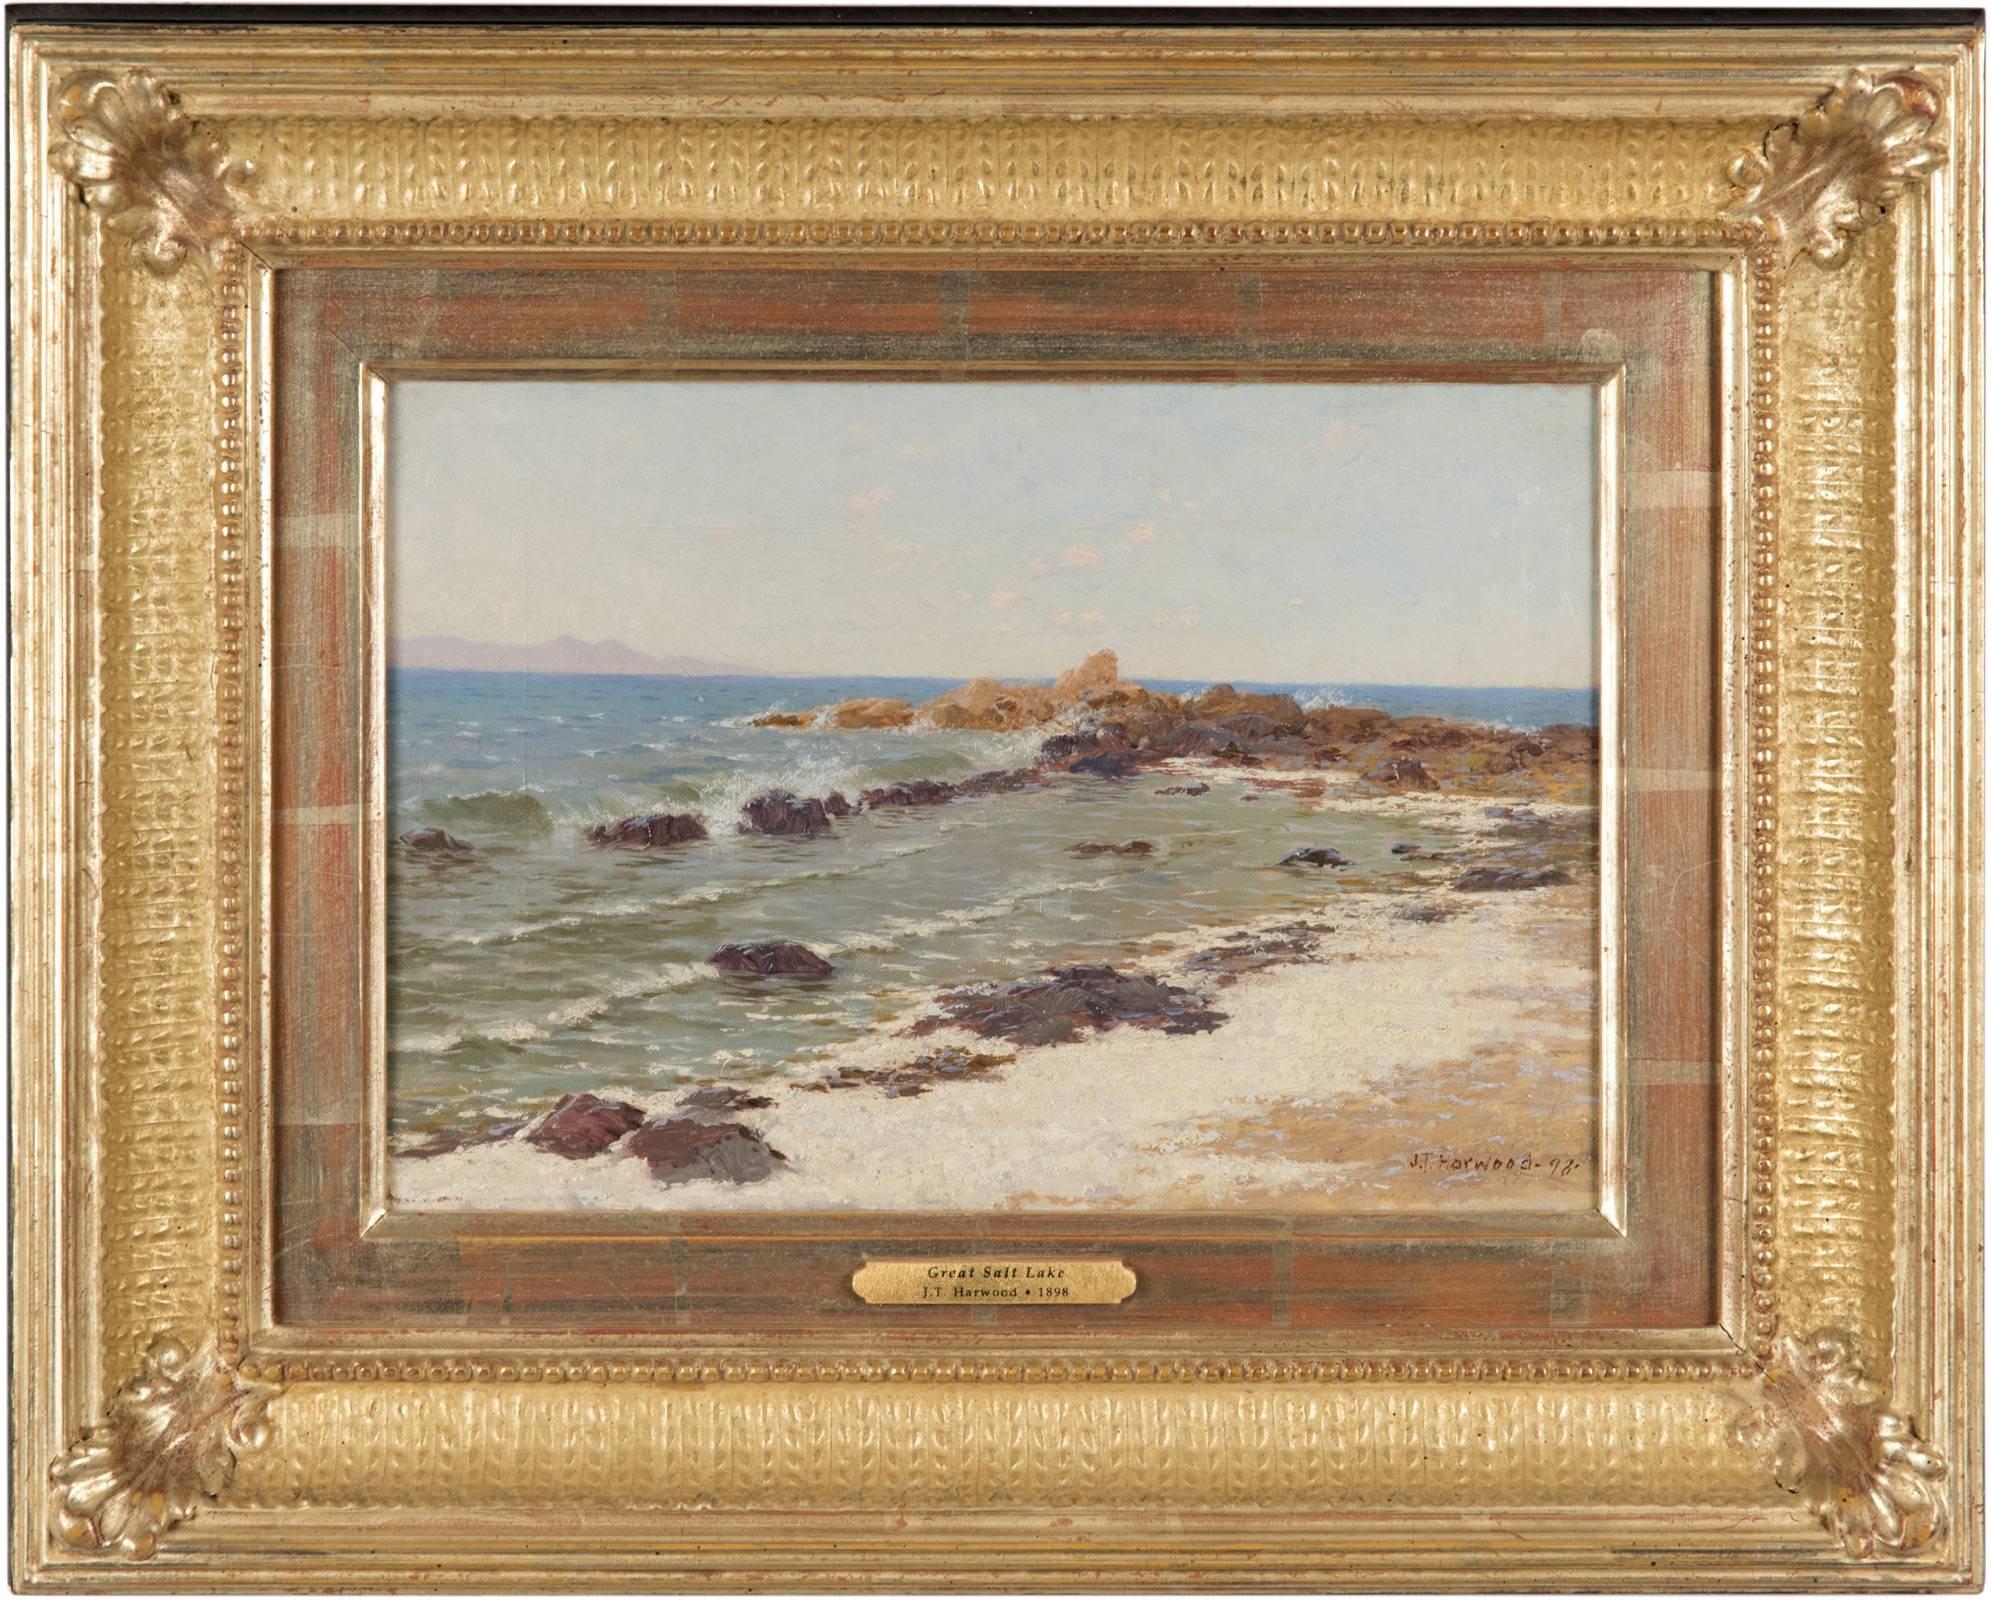 This seascape painting represents the Academic Realism training Harwood (1860-1940) received while studying in Paris in the late 19th century, an aesthetic style similar to Dutch Realism that values precise, tight brushwork and rich earthy tones.